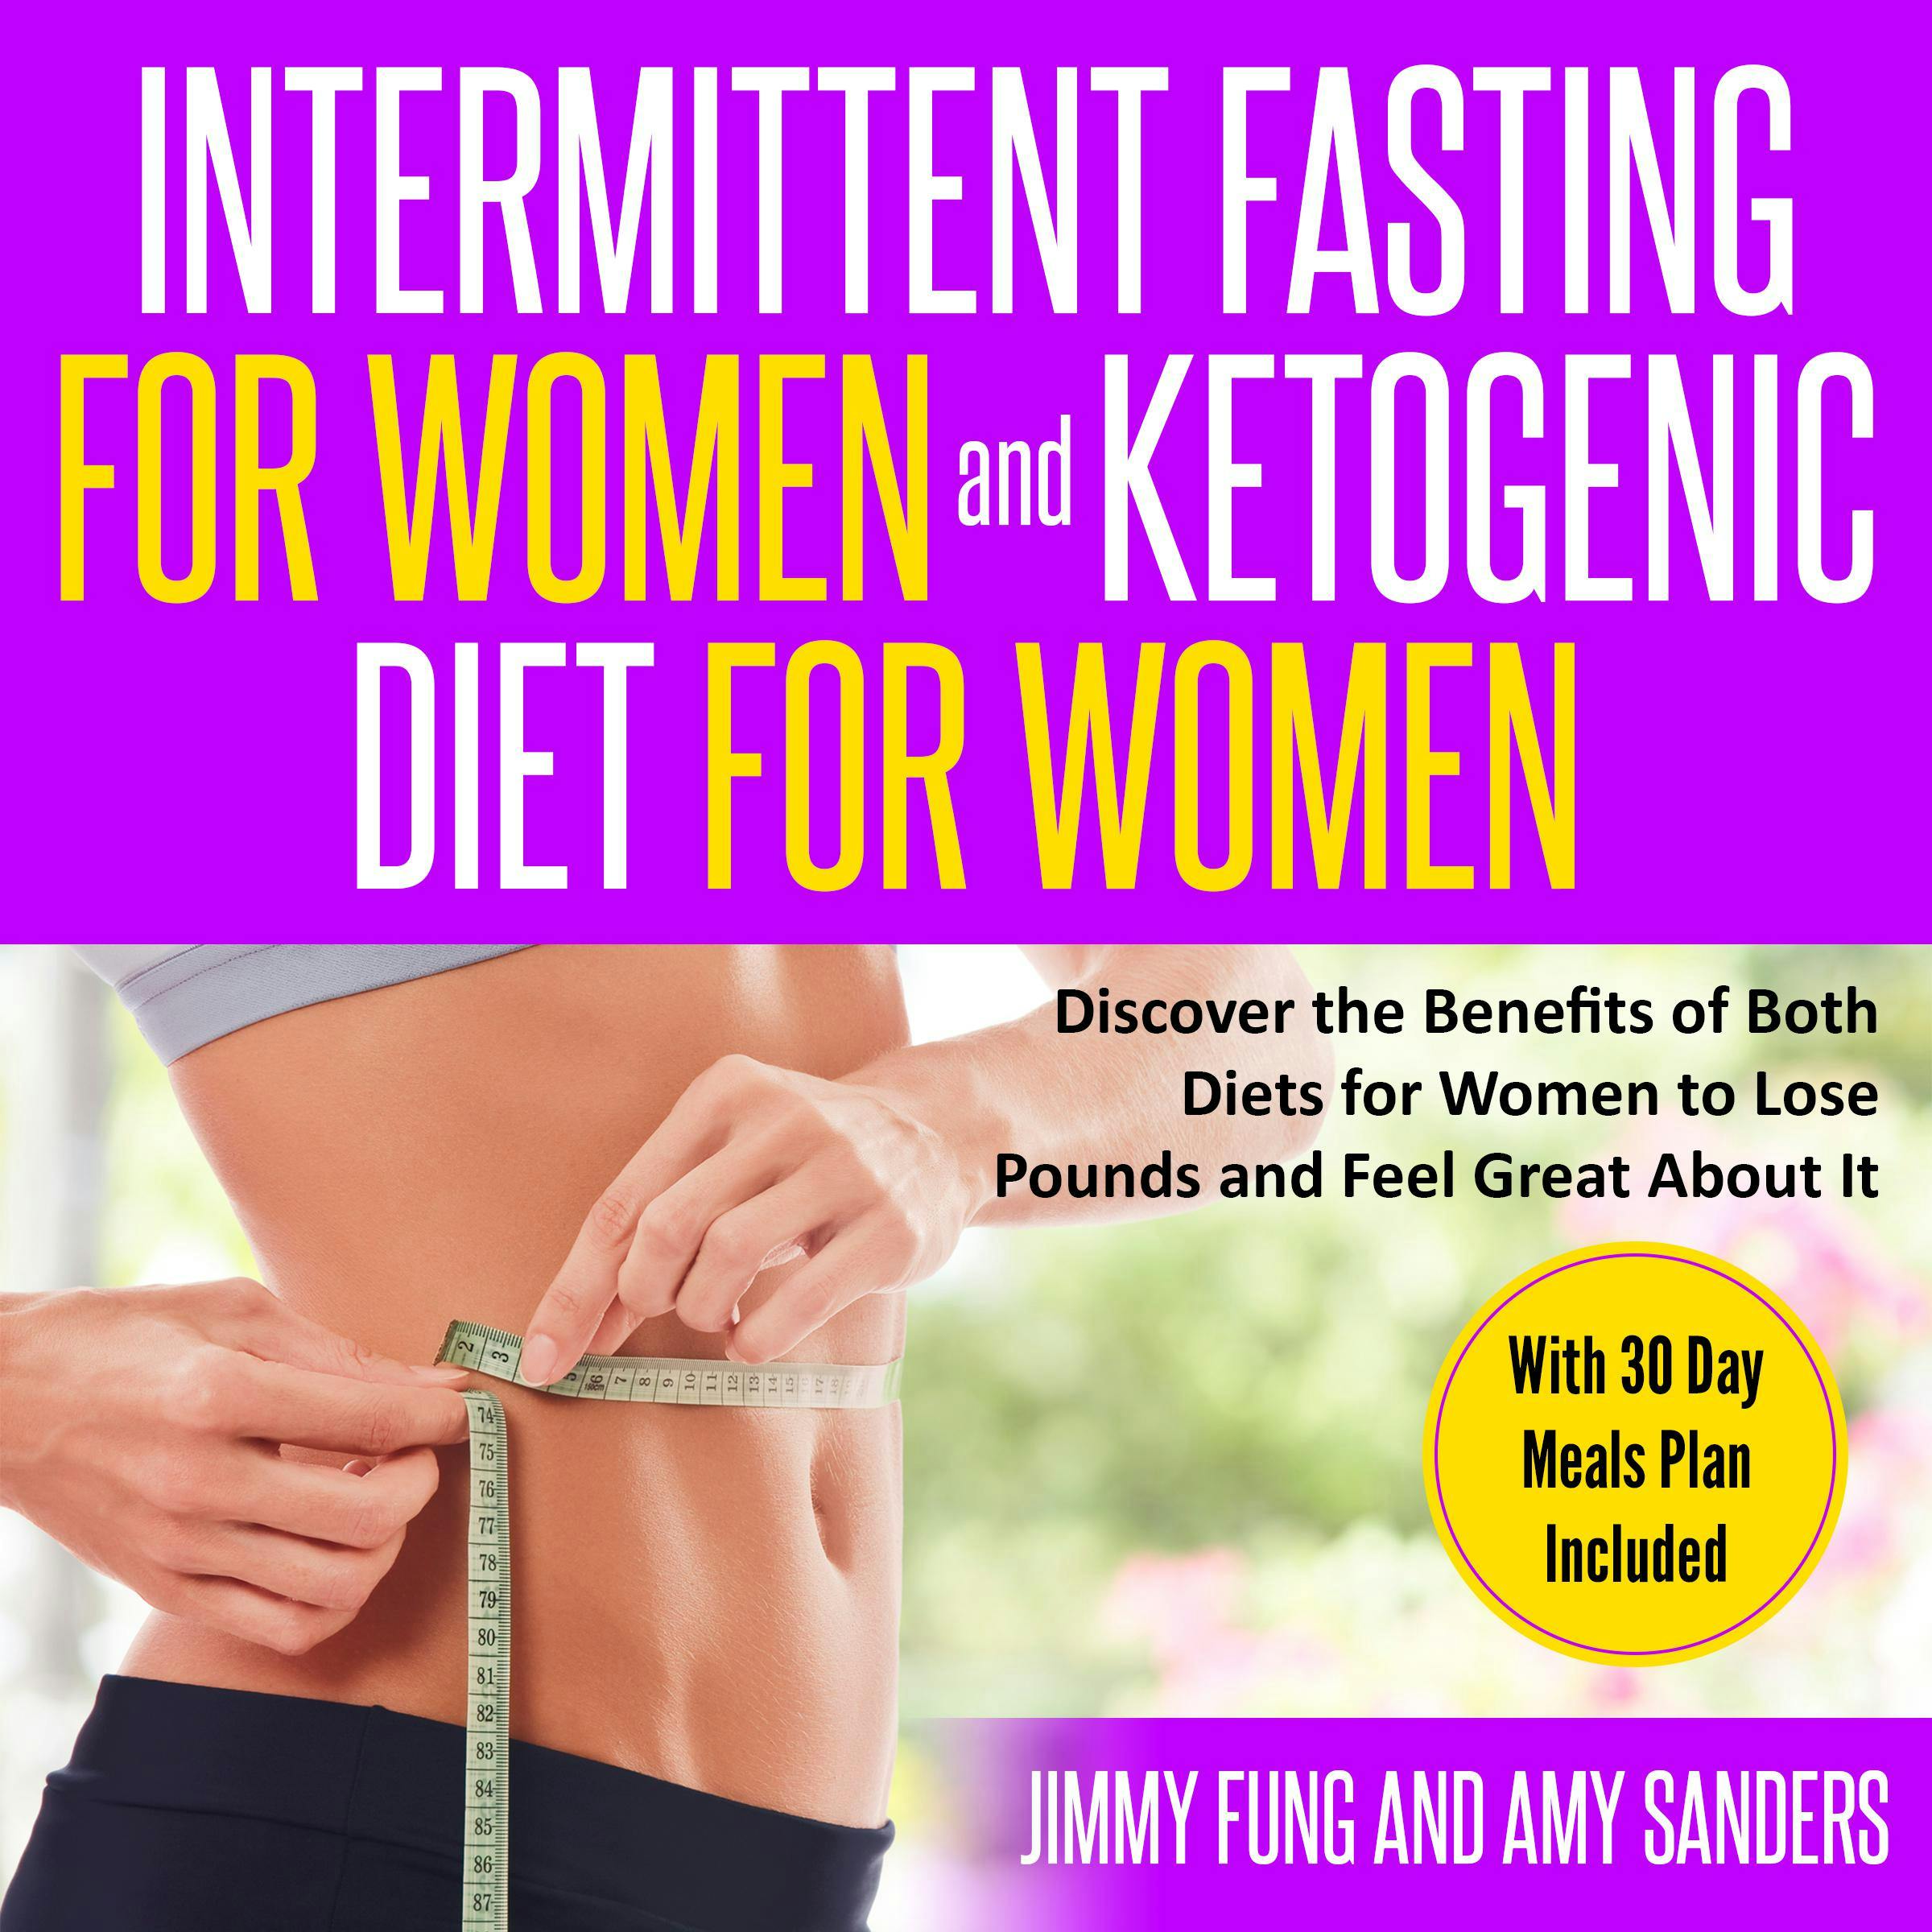 Intermittent Fasting for Women and Ketogenic Diet for Women: Discover the Benefits of Both Diets for Women to Lose Pounds and Feel Great About It. With 30 Day Meals Plan Included - Amy Sanders, Jimmy Fung